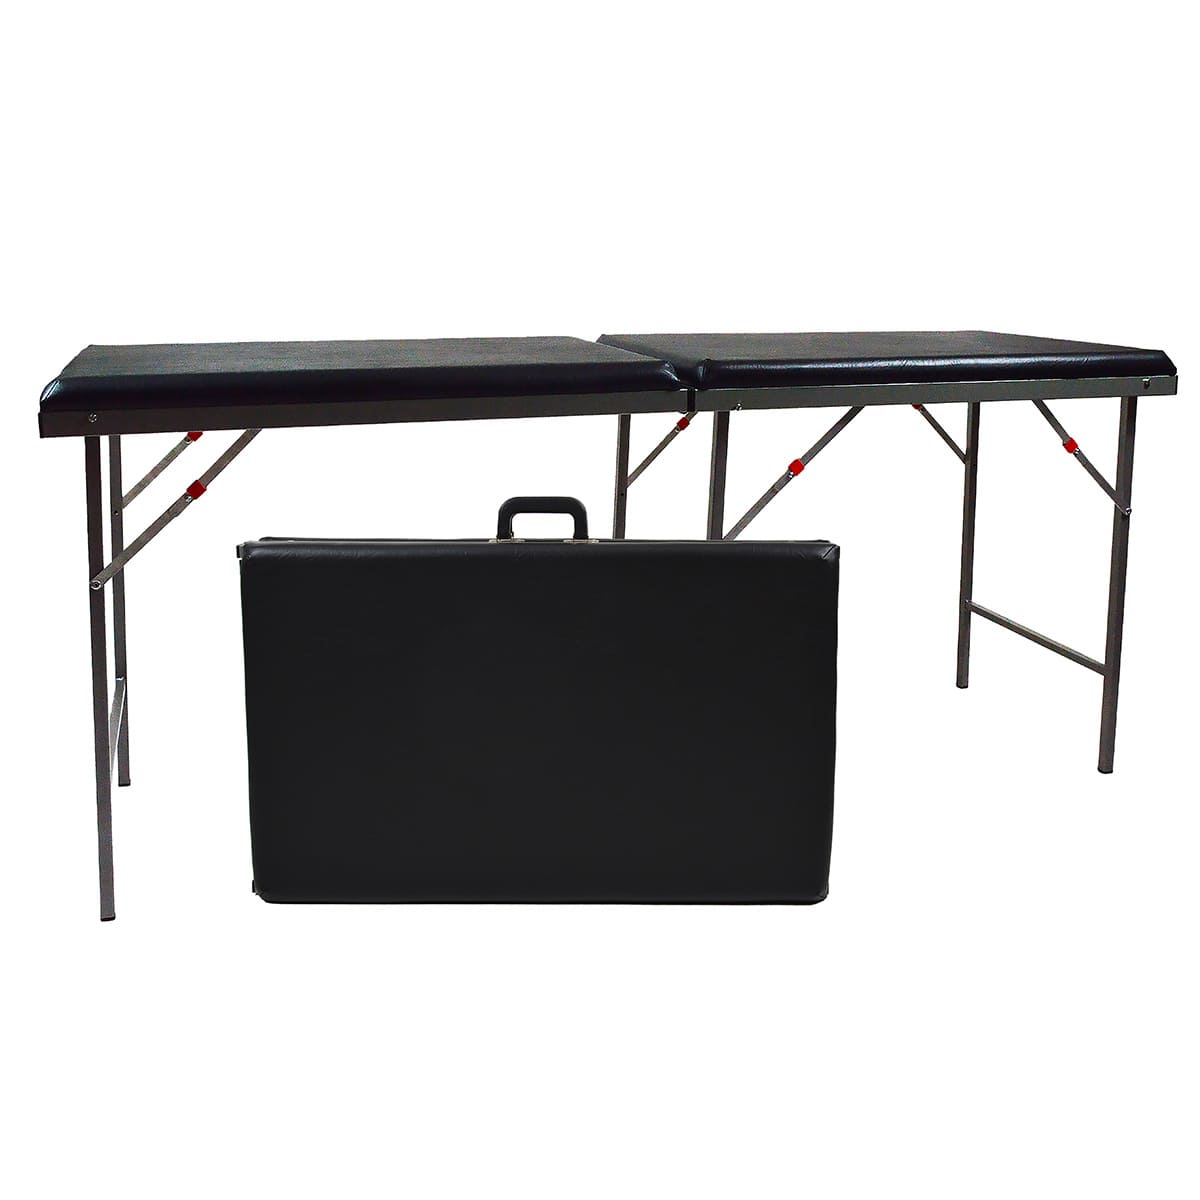 Foldable Osteo and Physio table, height 80cm